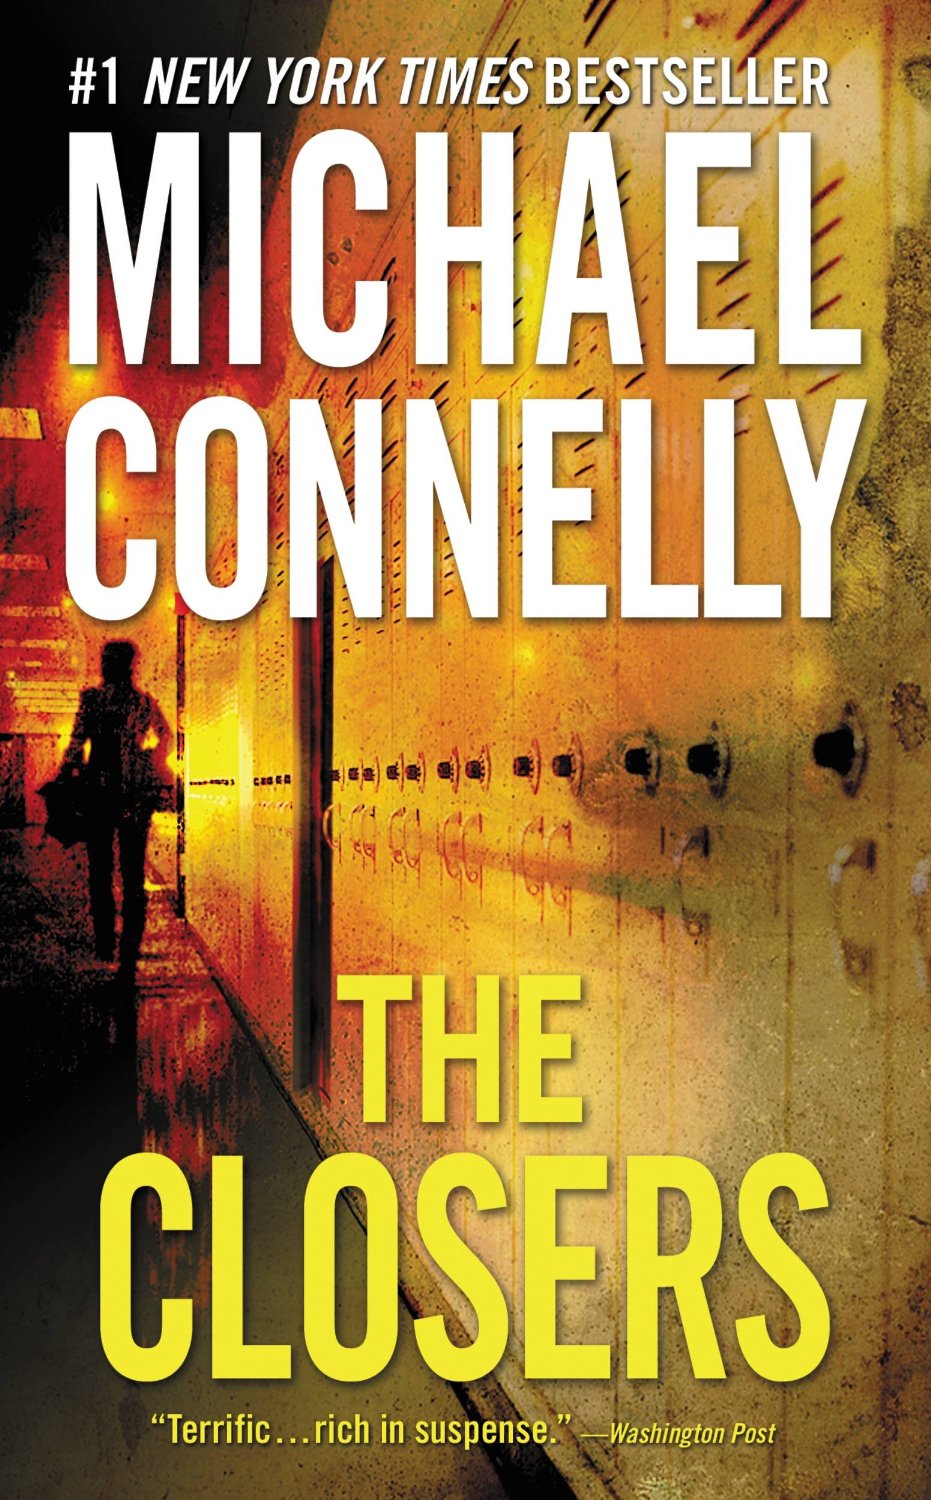 Michael Connelly The Closers